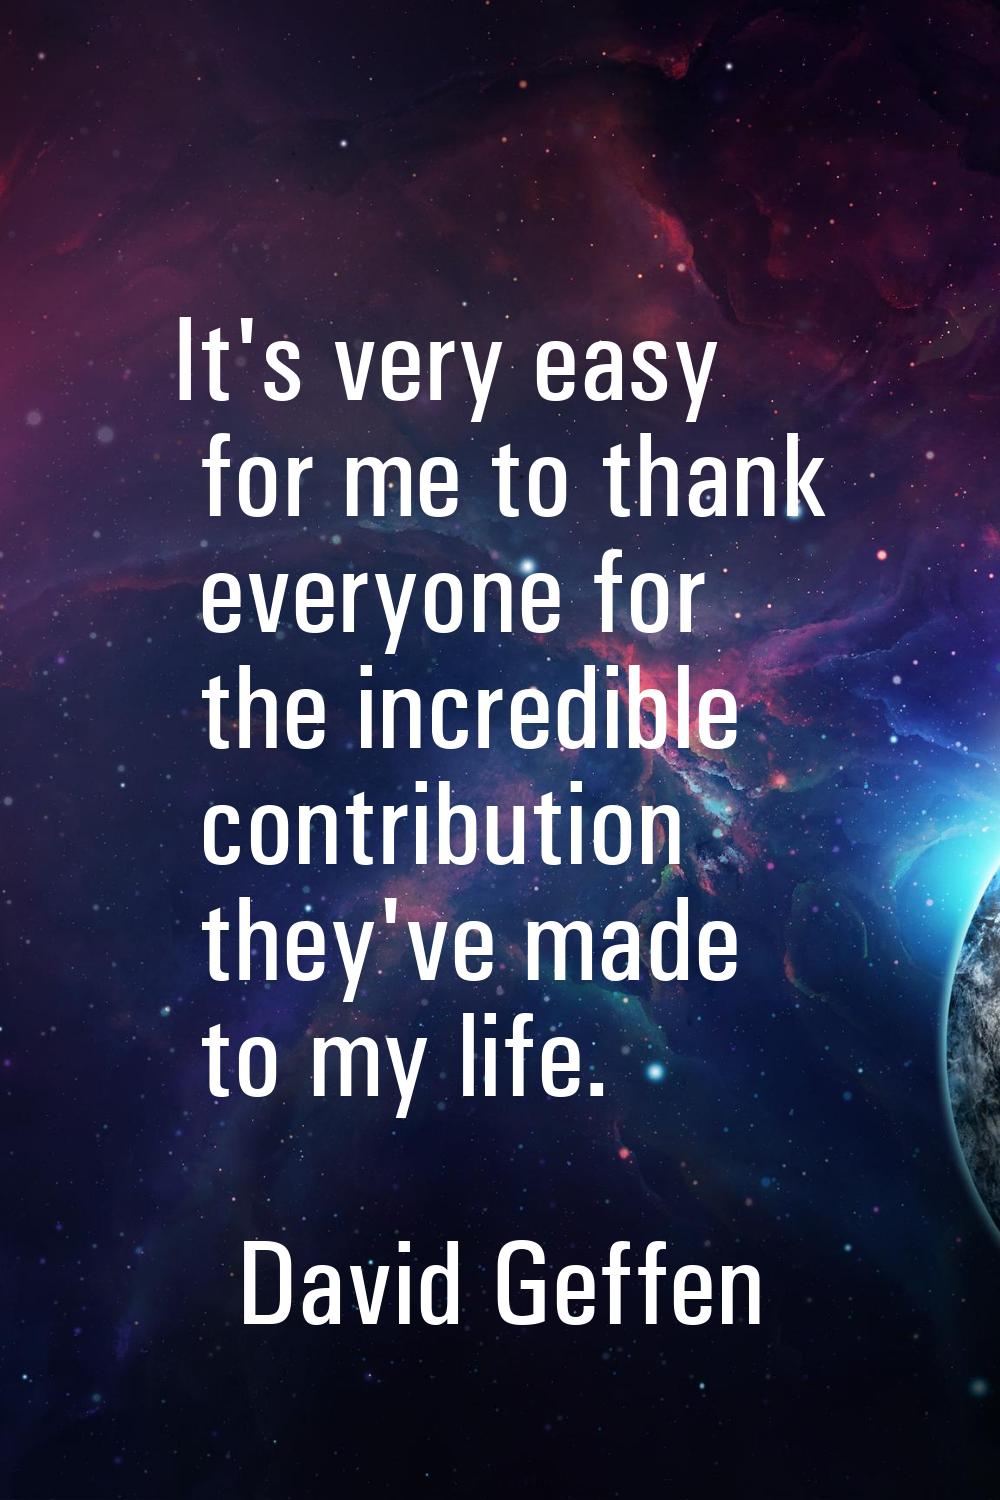 It's very easy for me to thank everyone for the incredible contribution they've made to my life.